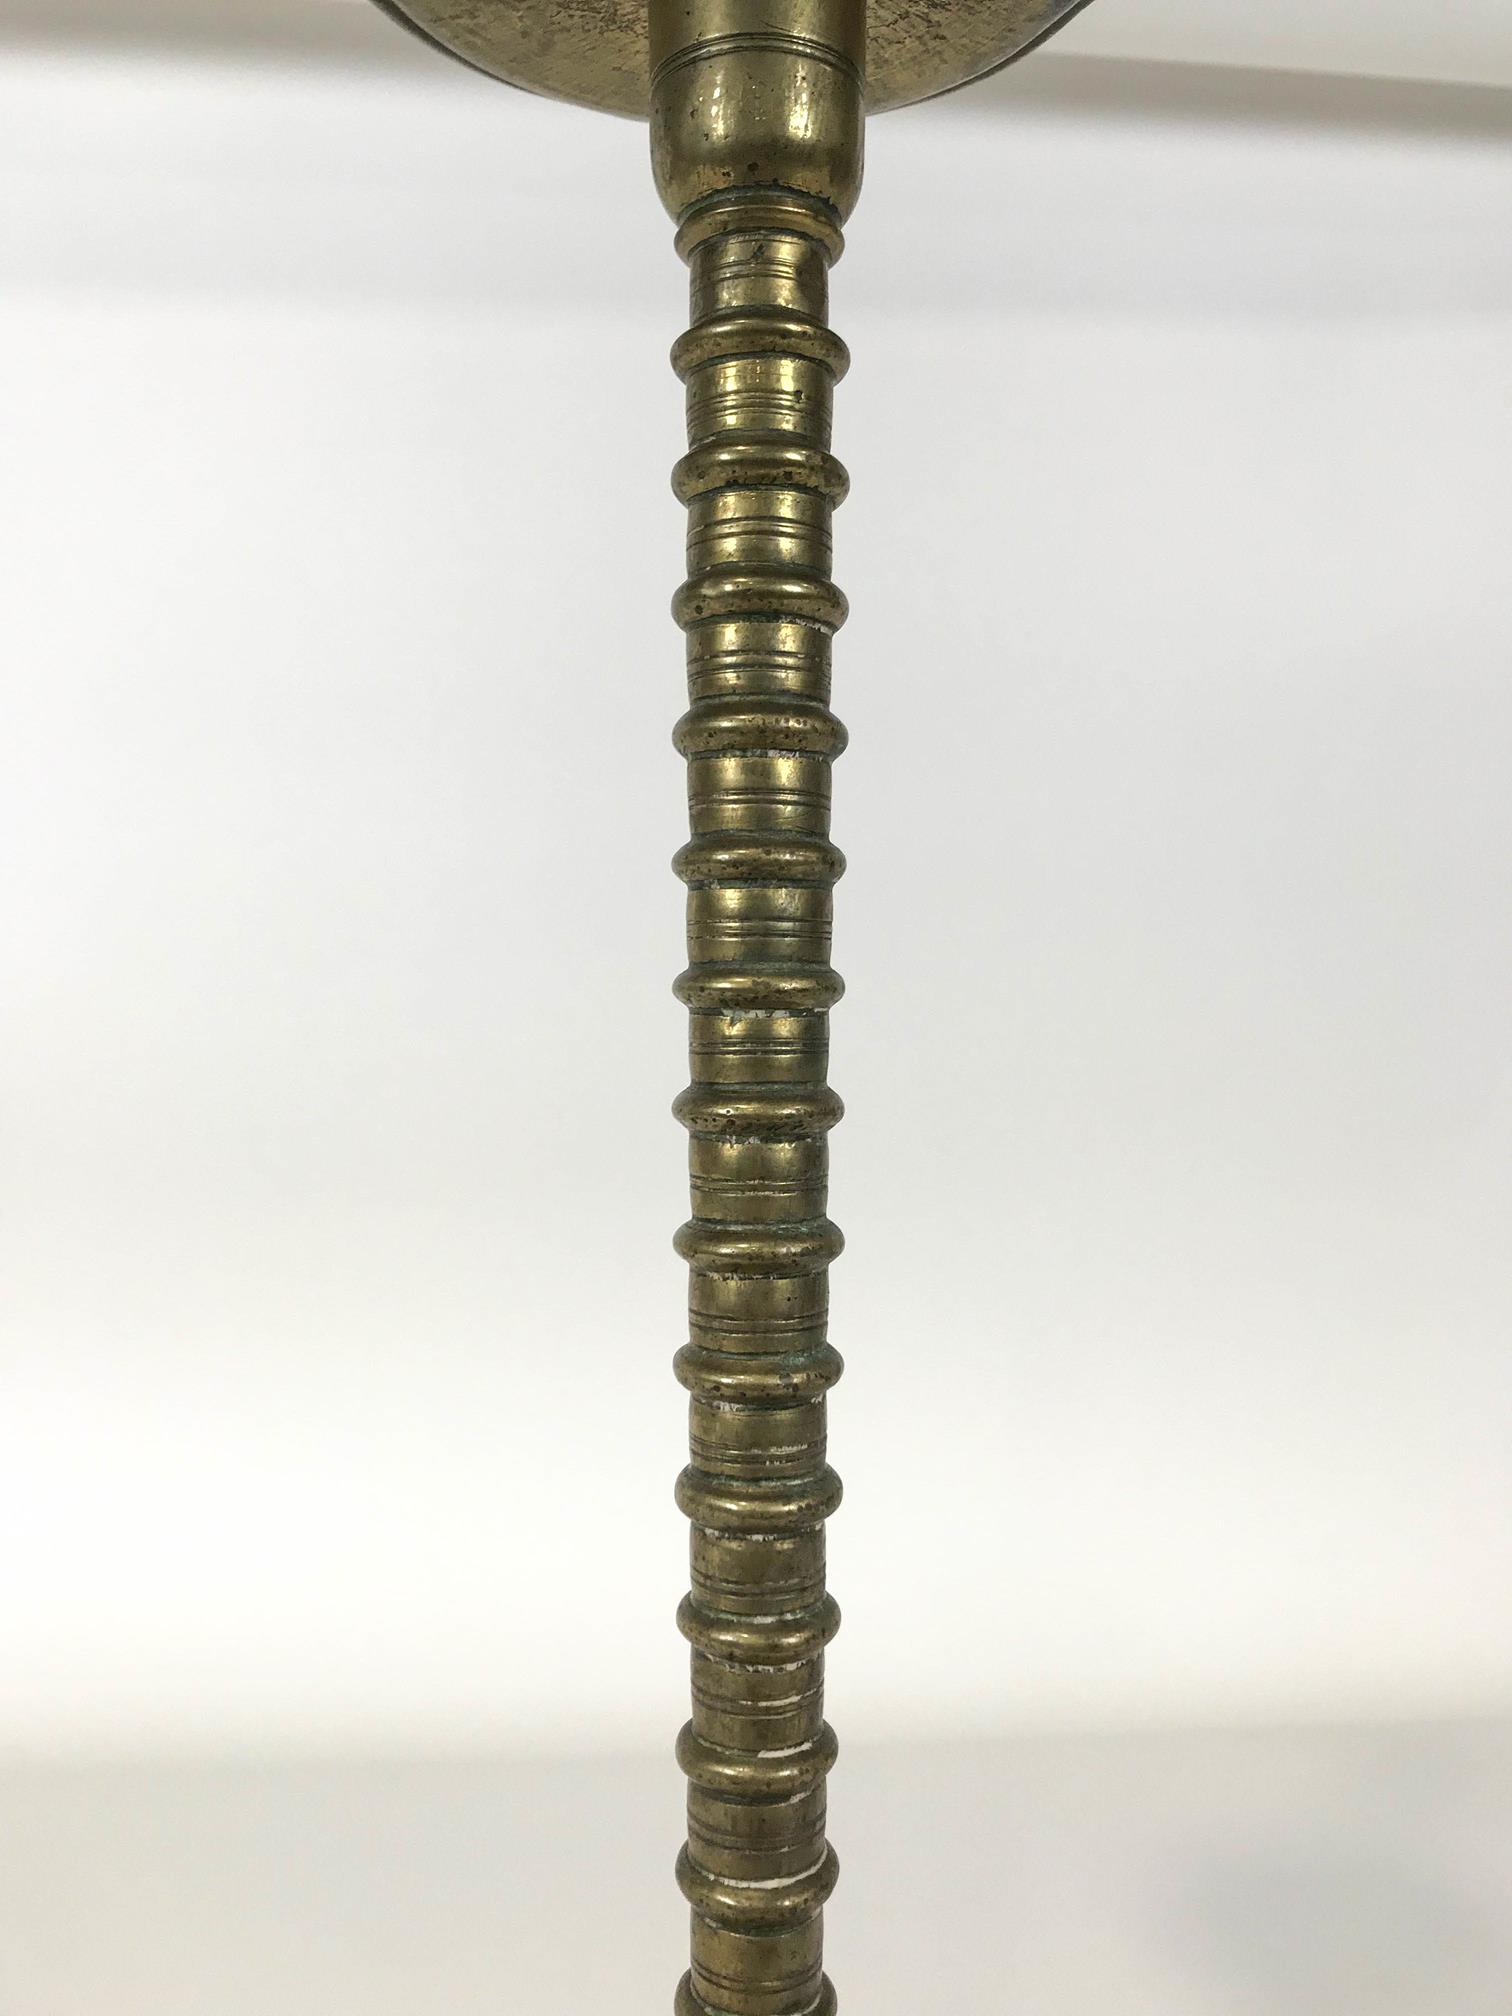 A late 18th/ early 19th century brass candlestick with flared drip pan - Image 4 of 4